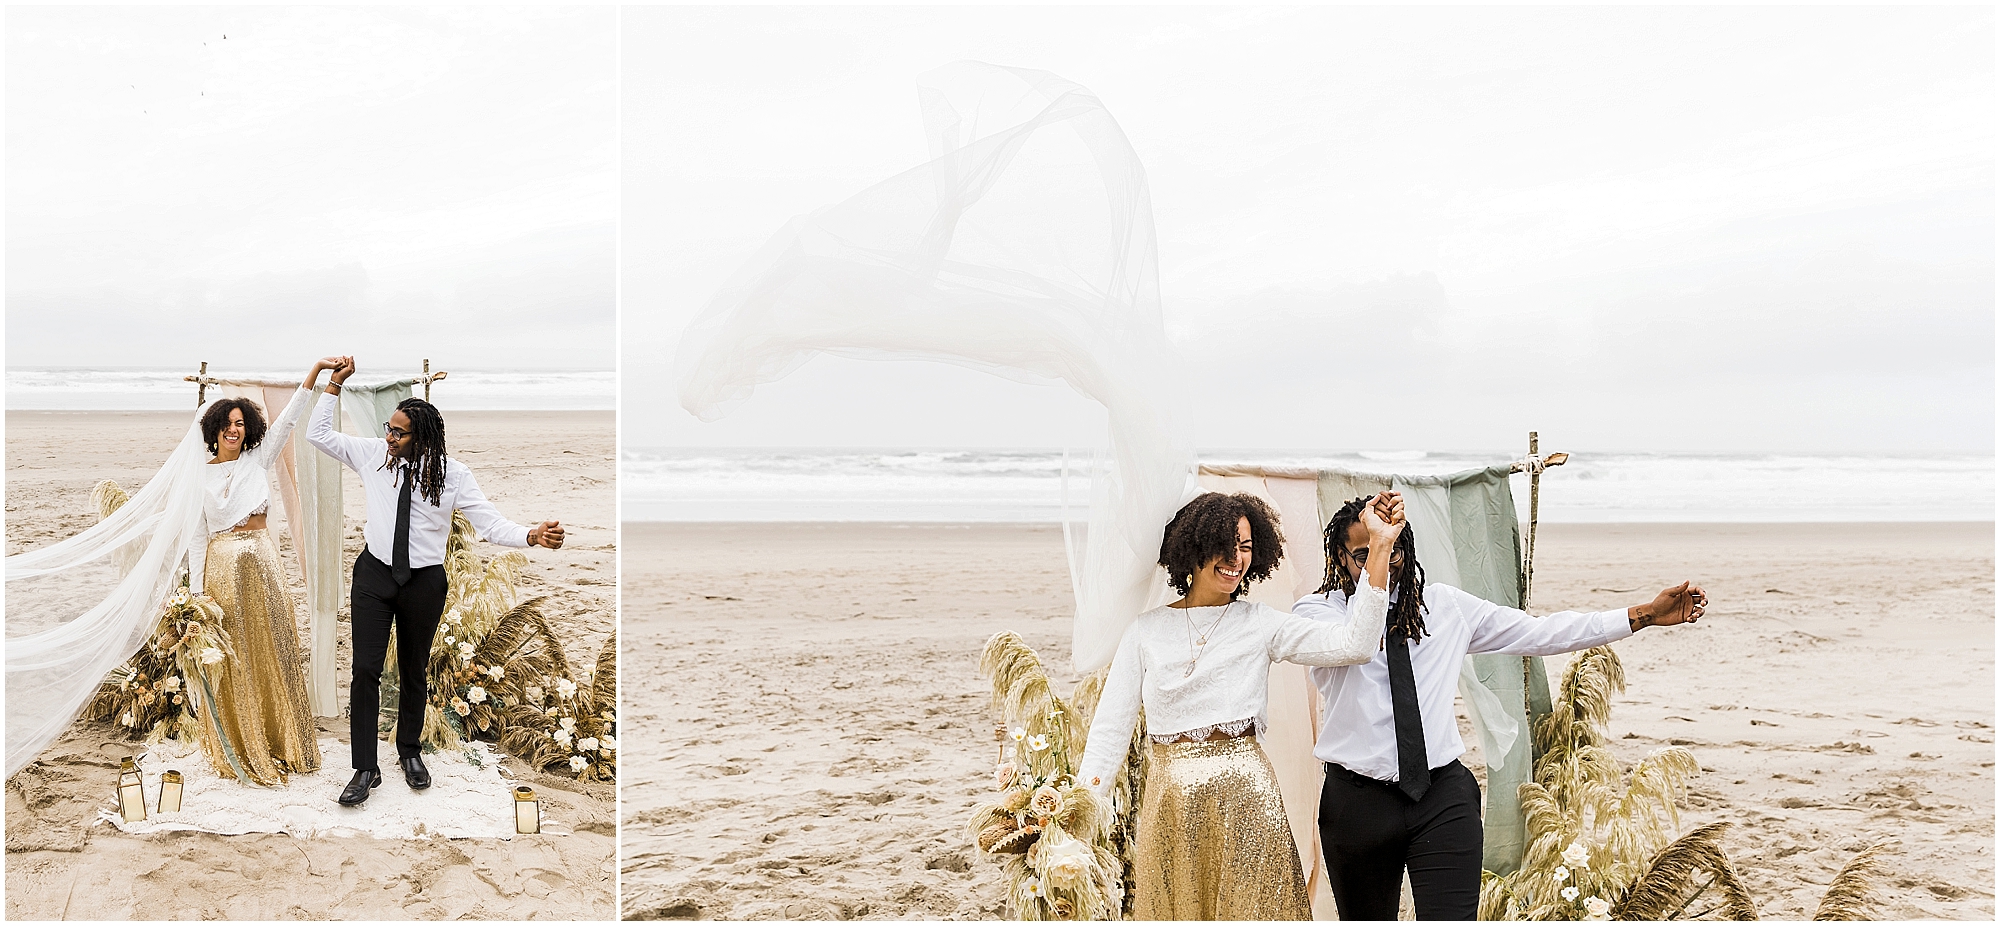 A black couple celebrates throwing their hands up in the air after they said their wedding vows on the beach of their Oregon Coast elopement. | Erica Swantek Photography